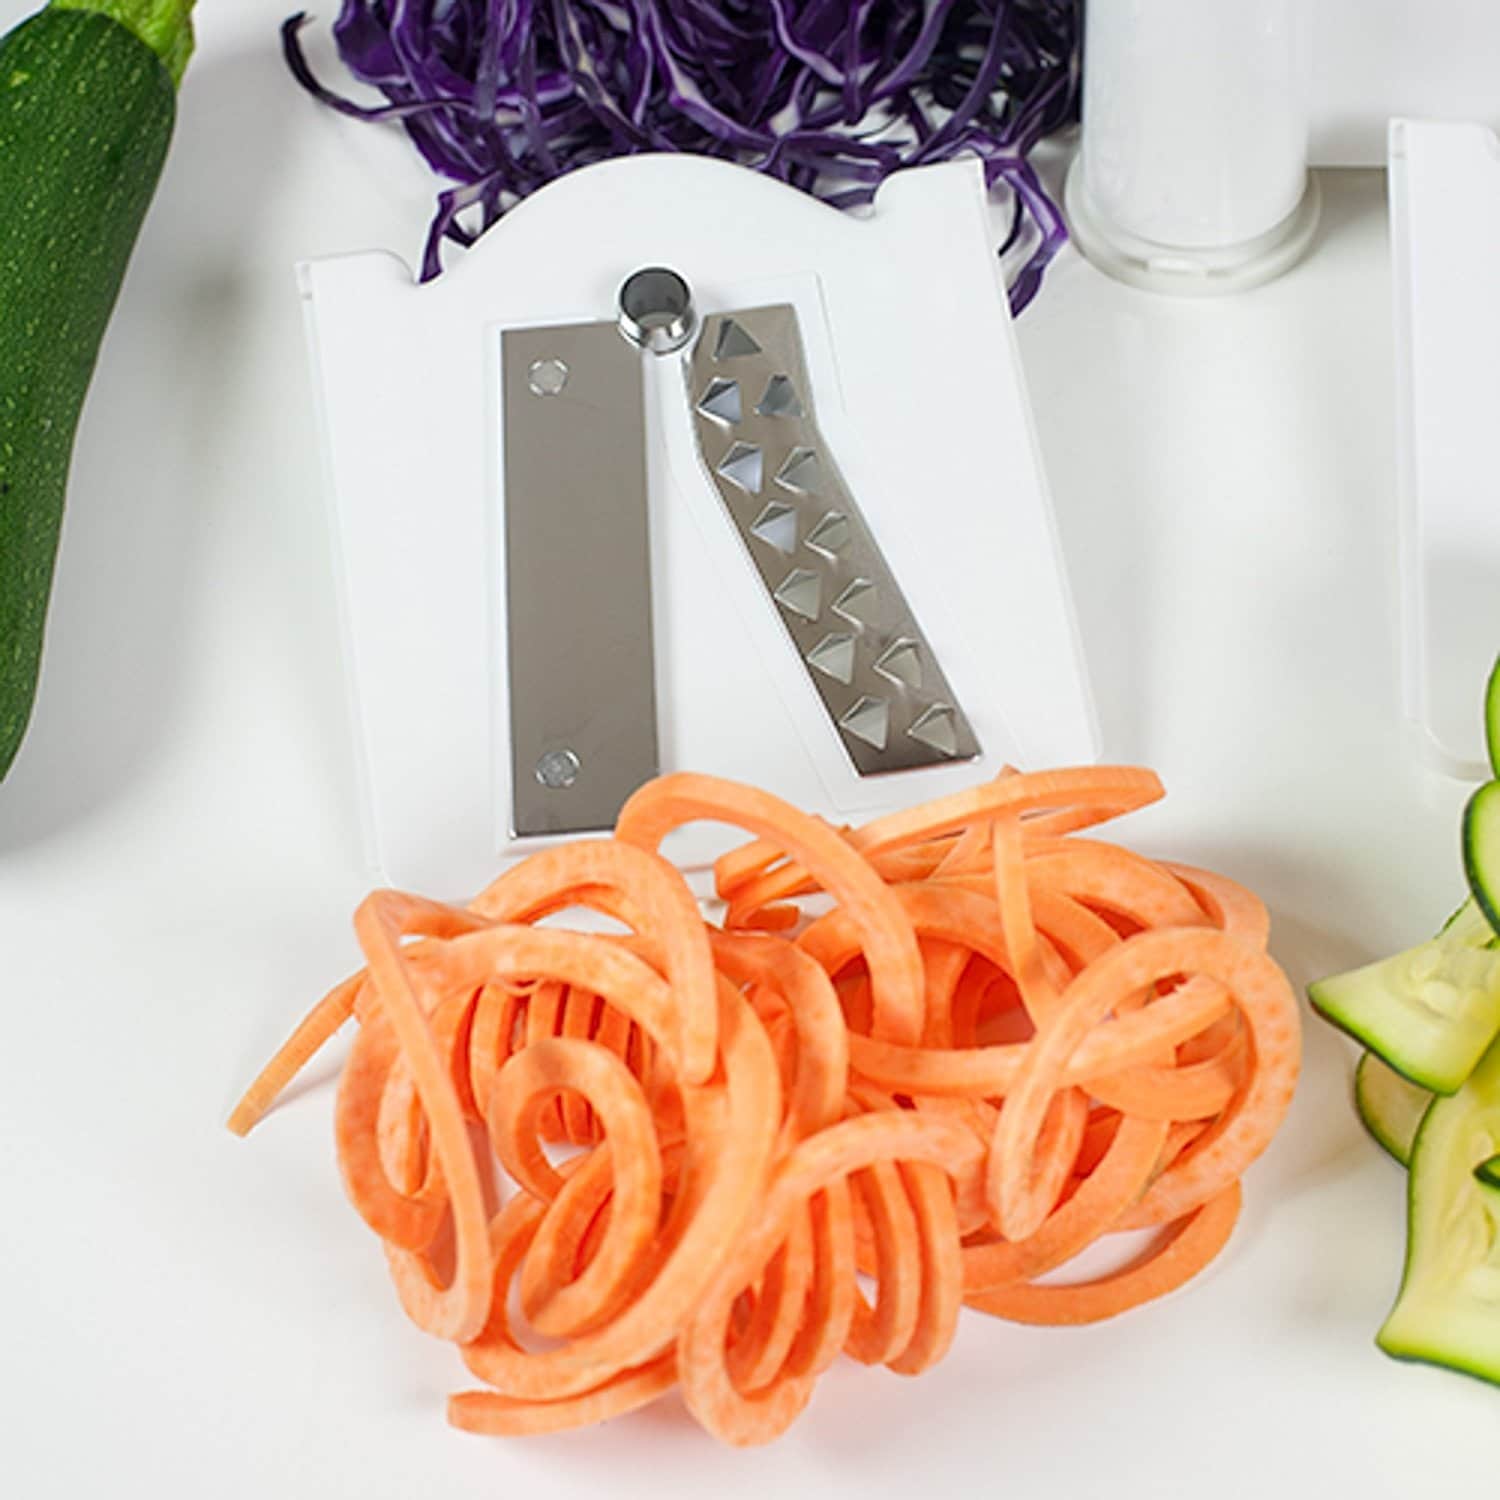 https://ak1.ostkcdn.com/images/products/is/images/direct/79b287e1fabe5a6fb09eb3470cce4f95f1976b7b/Paderno-World-Cuisine-Tri-Blade-Vegetable-Spiralizer-Slicer.jpg